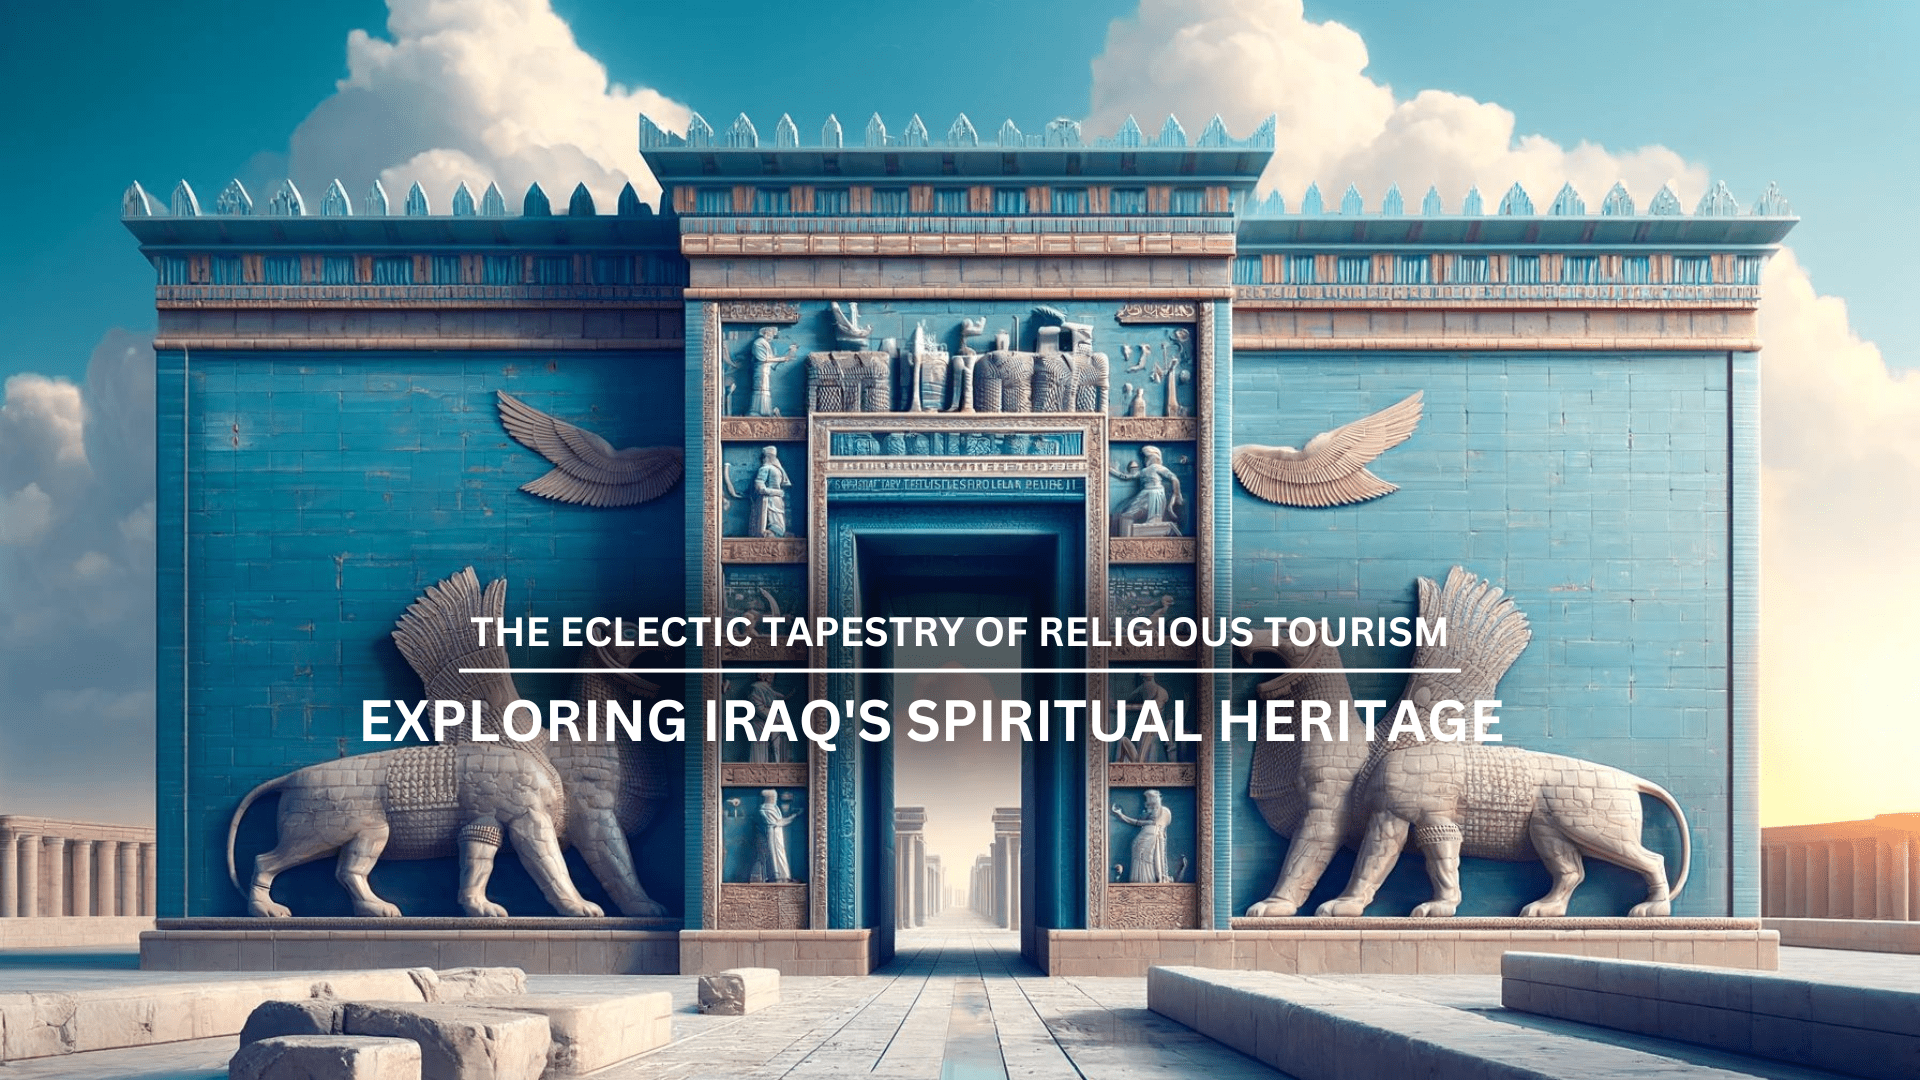 The Eclectic Tapestry of Religious Tourism: Exploring Iraq’s Spiritual Heritage